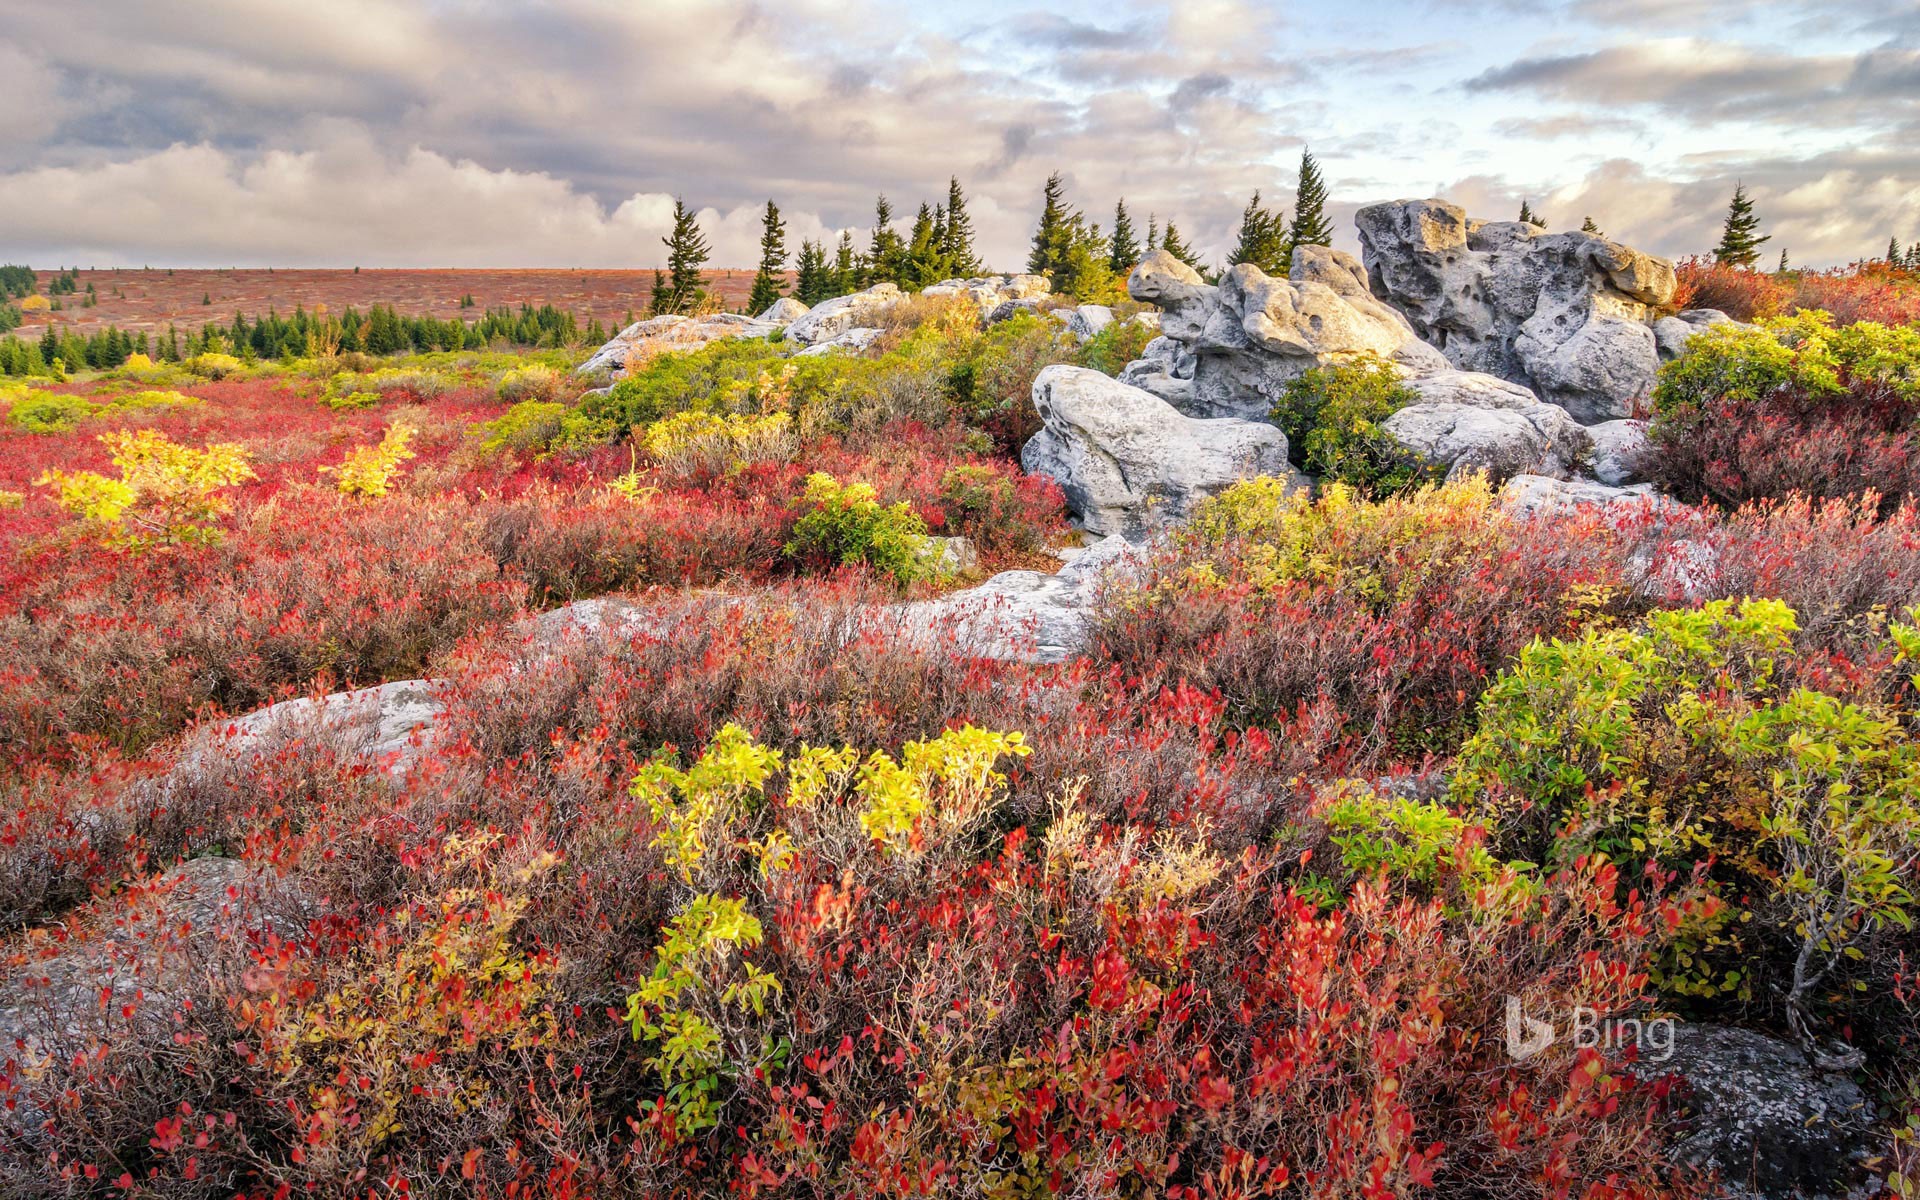 Bear Rocks Preserve in the Dolly Sods Wilderness, West Virginia, USA